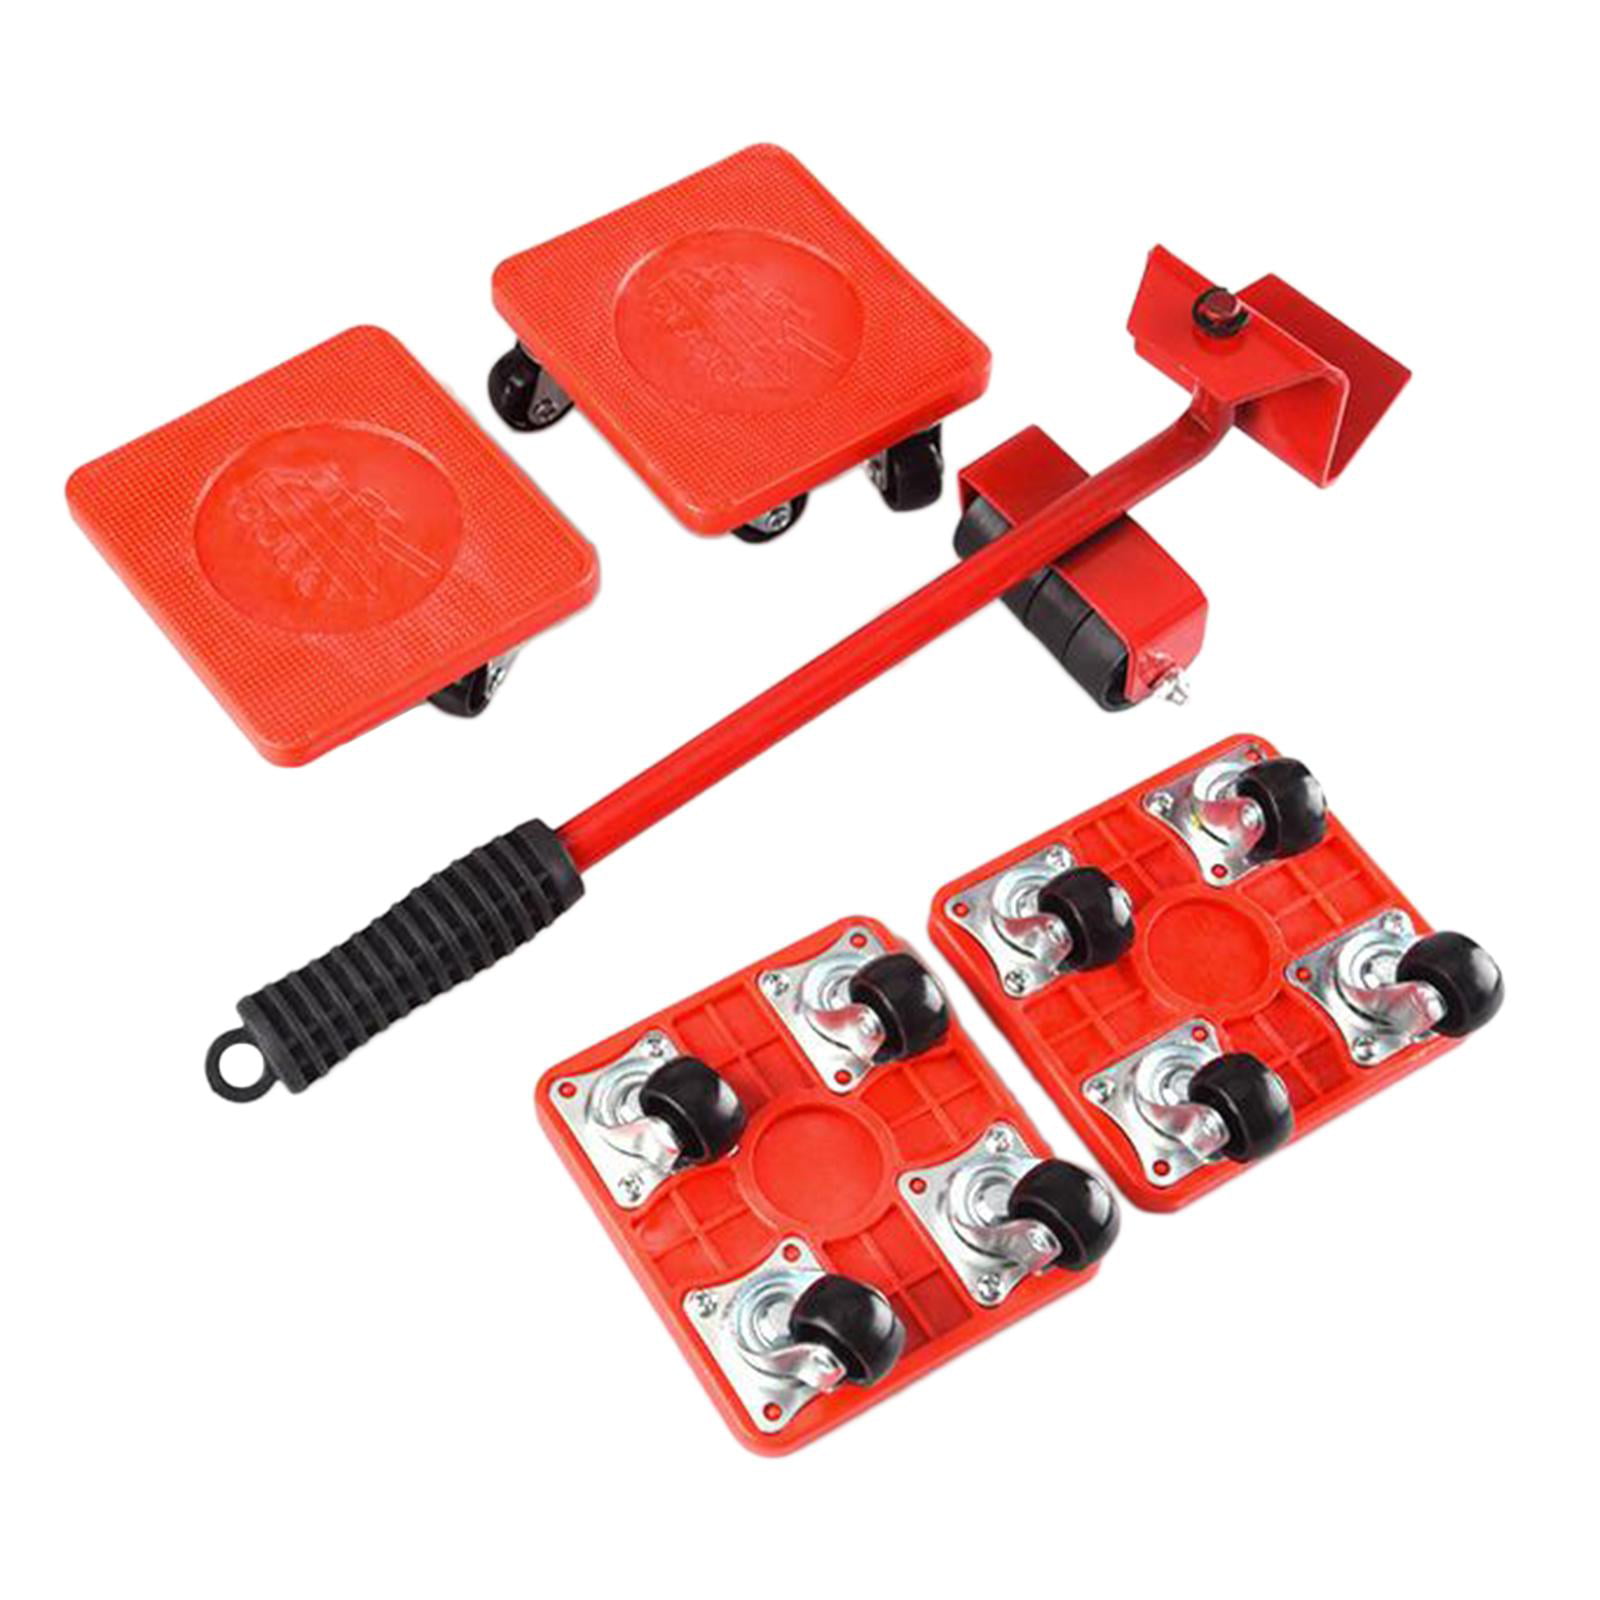 New Heavy Duty Furniture Lifter Transport Tool Furniture Mover set 4  Sliders 1 Wheel Bar for Lifting Moving Furniture Helper